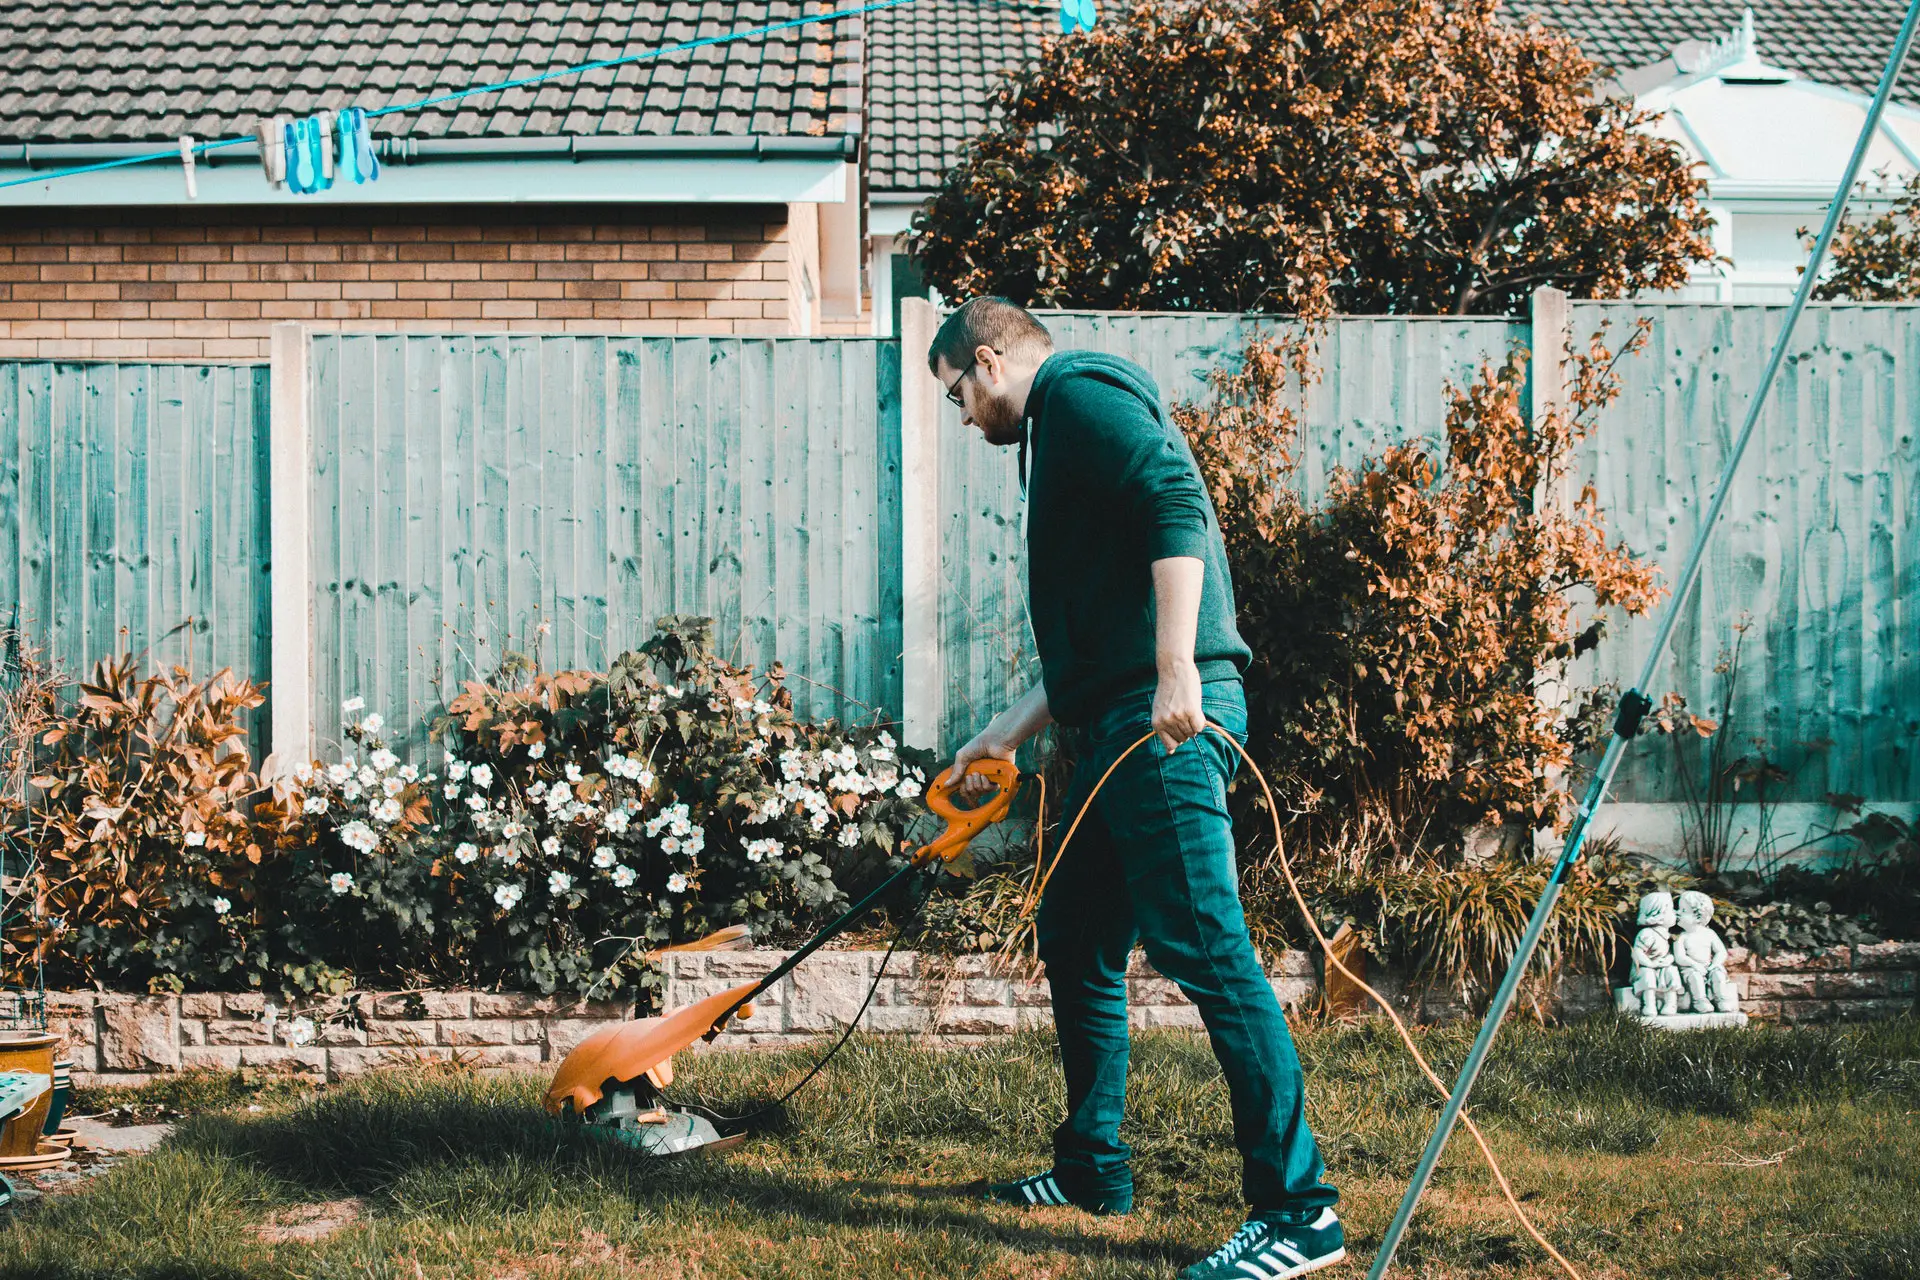 man-holding-orange-electric-grass-cutter-on-lawn-1453499